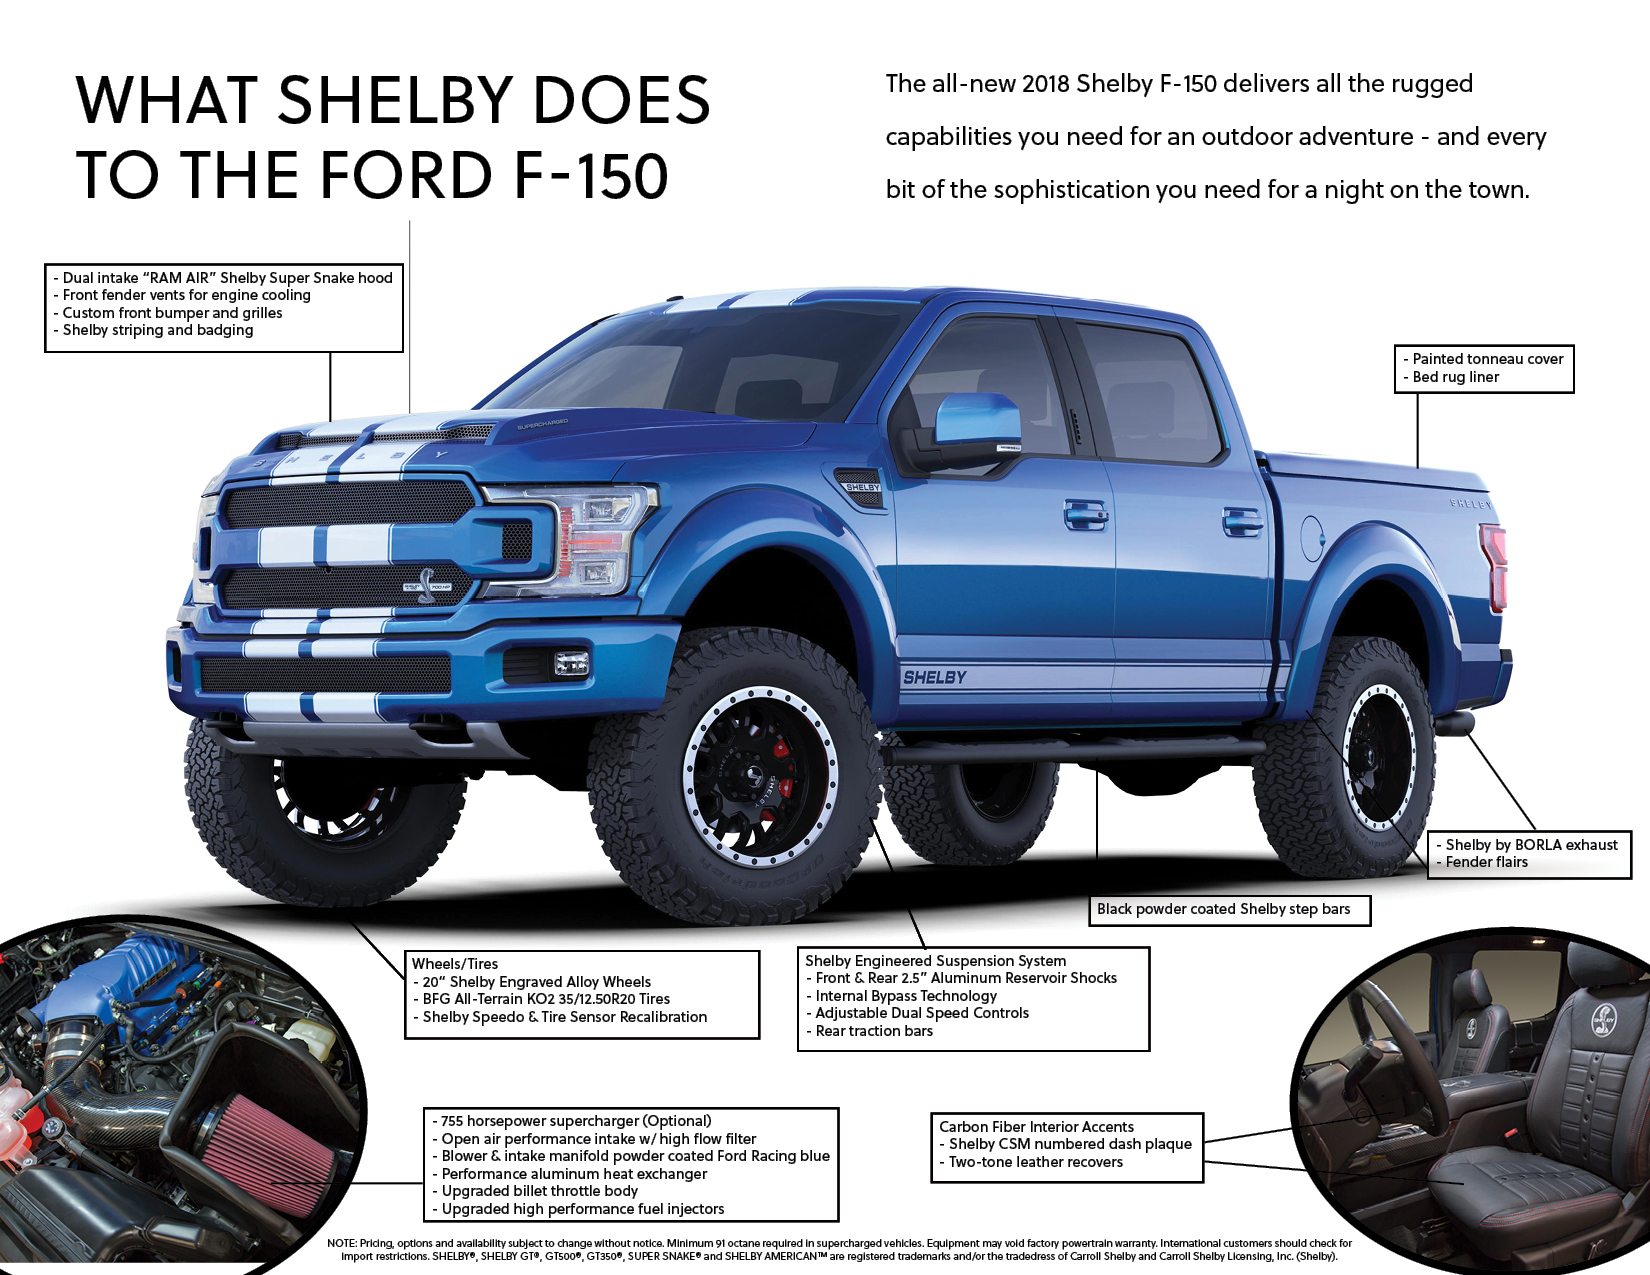 2017 Ford Raptor Vs 700hp Shelby F150 Review American Legends